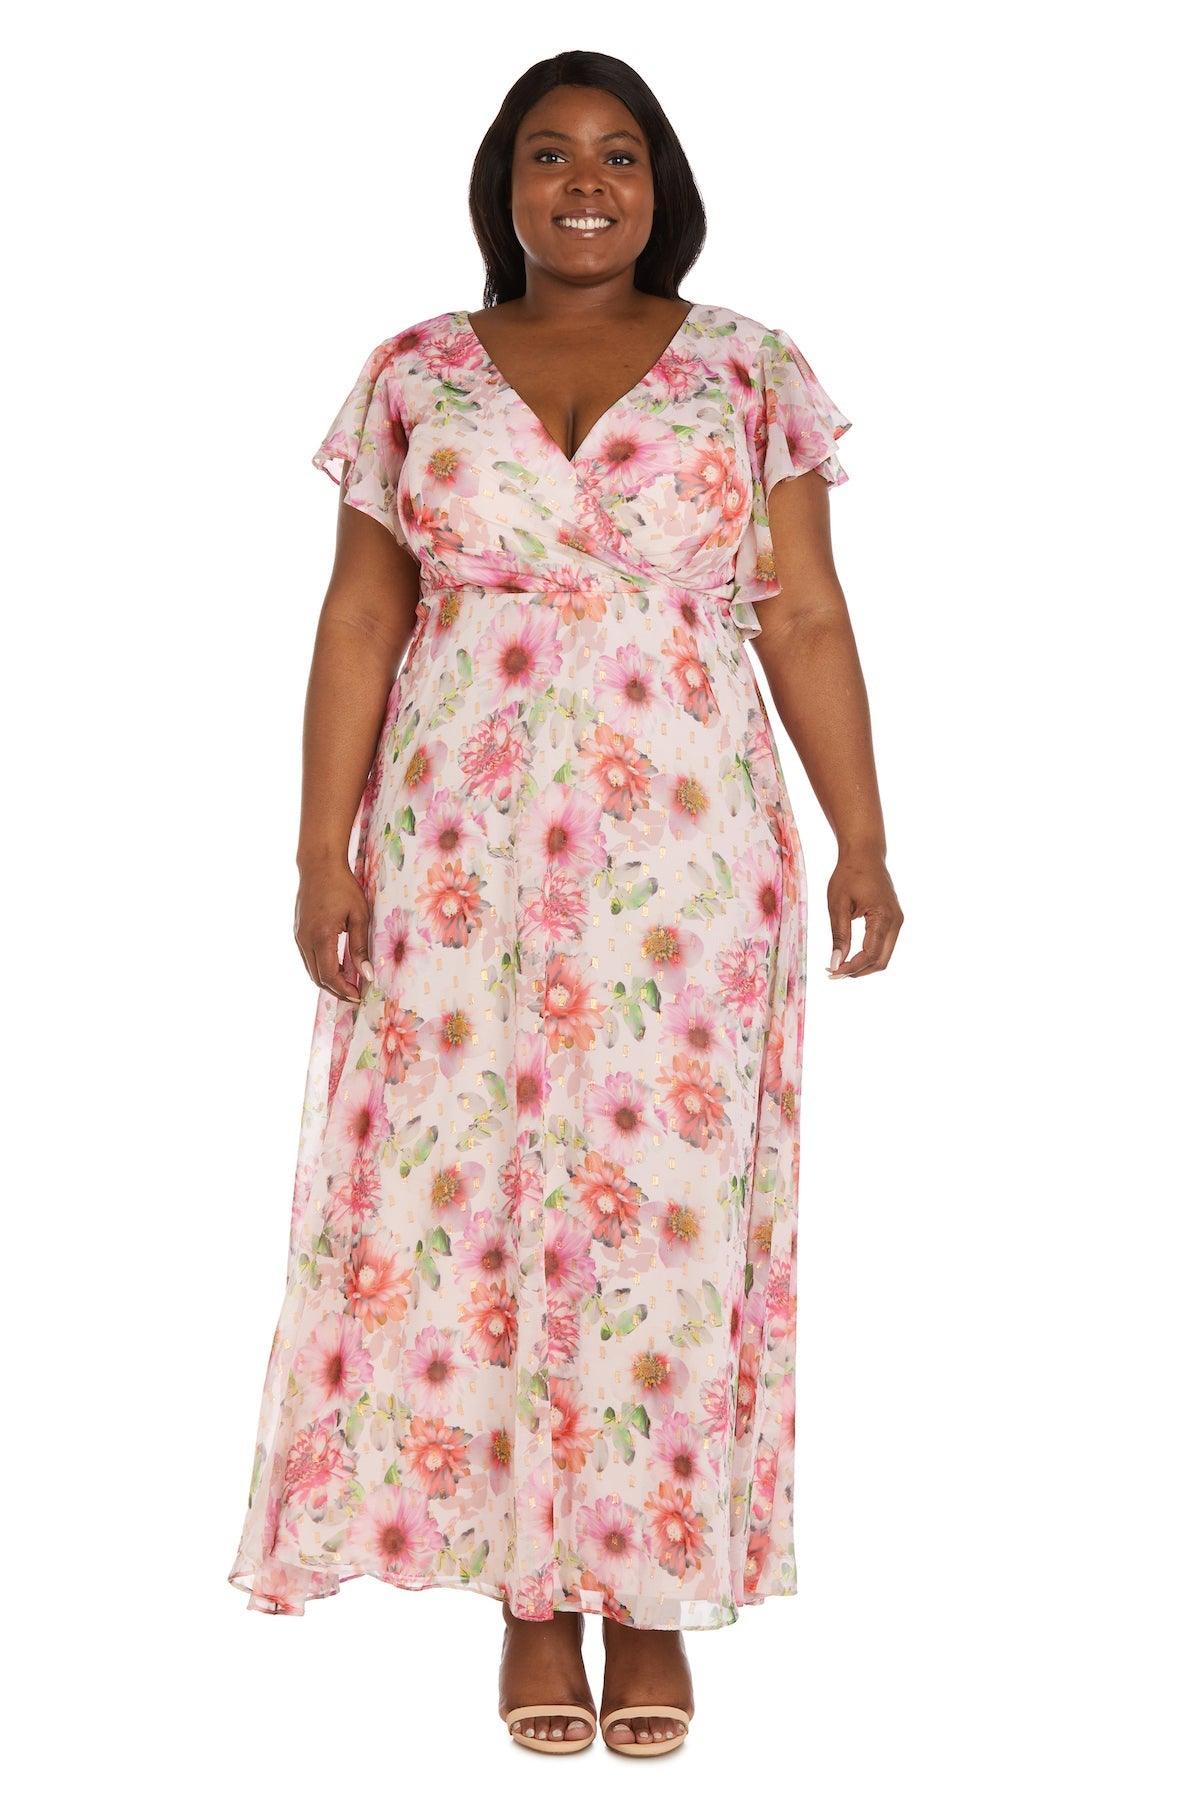 Nightway Long Plus Size Floral Maxi Dress 22140W - The Dress Outlet